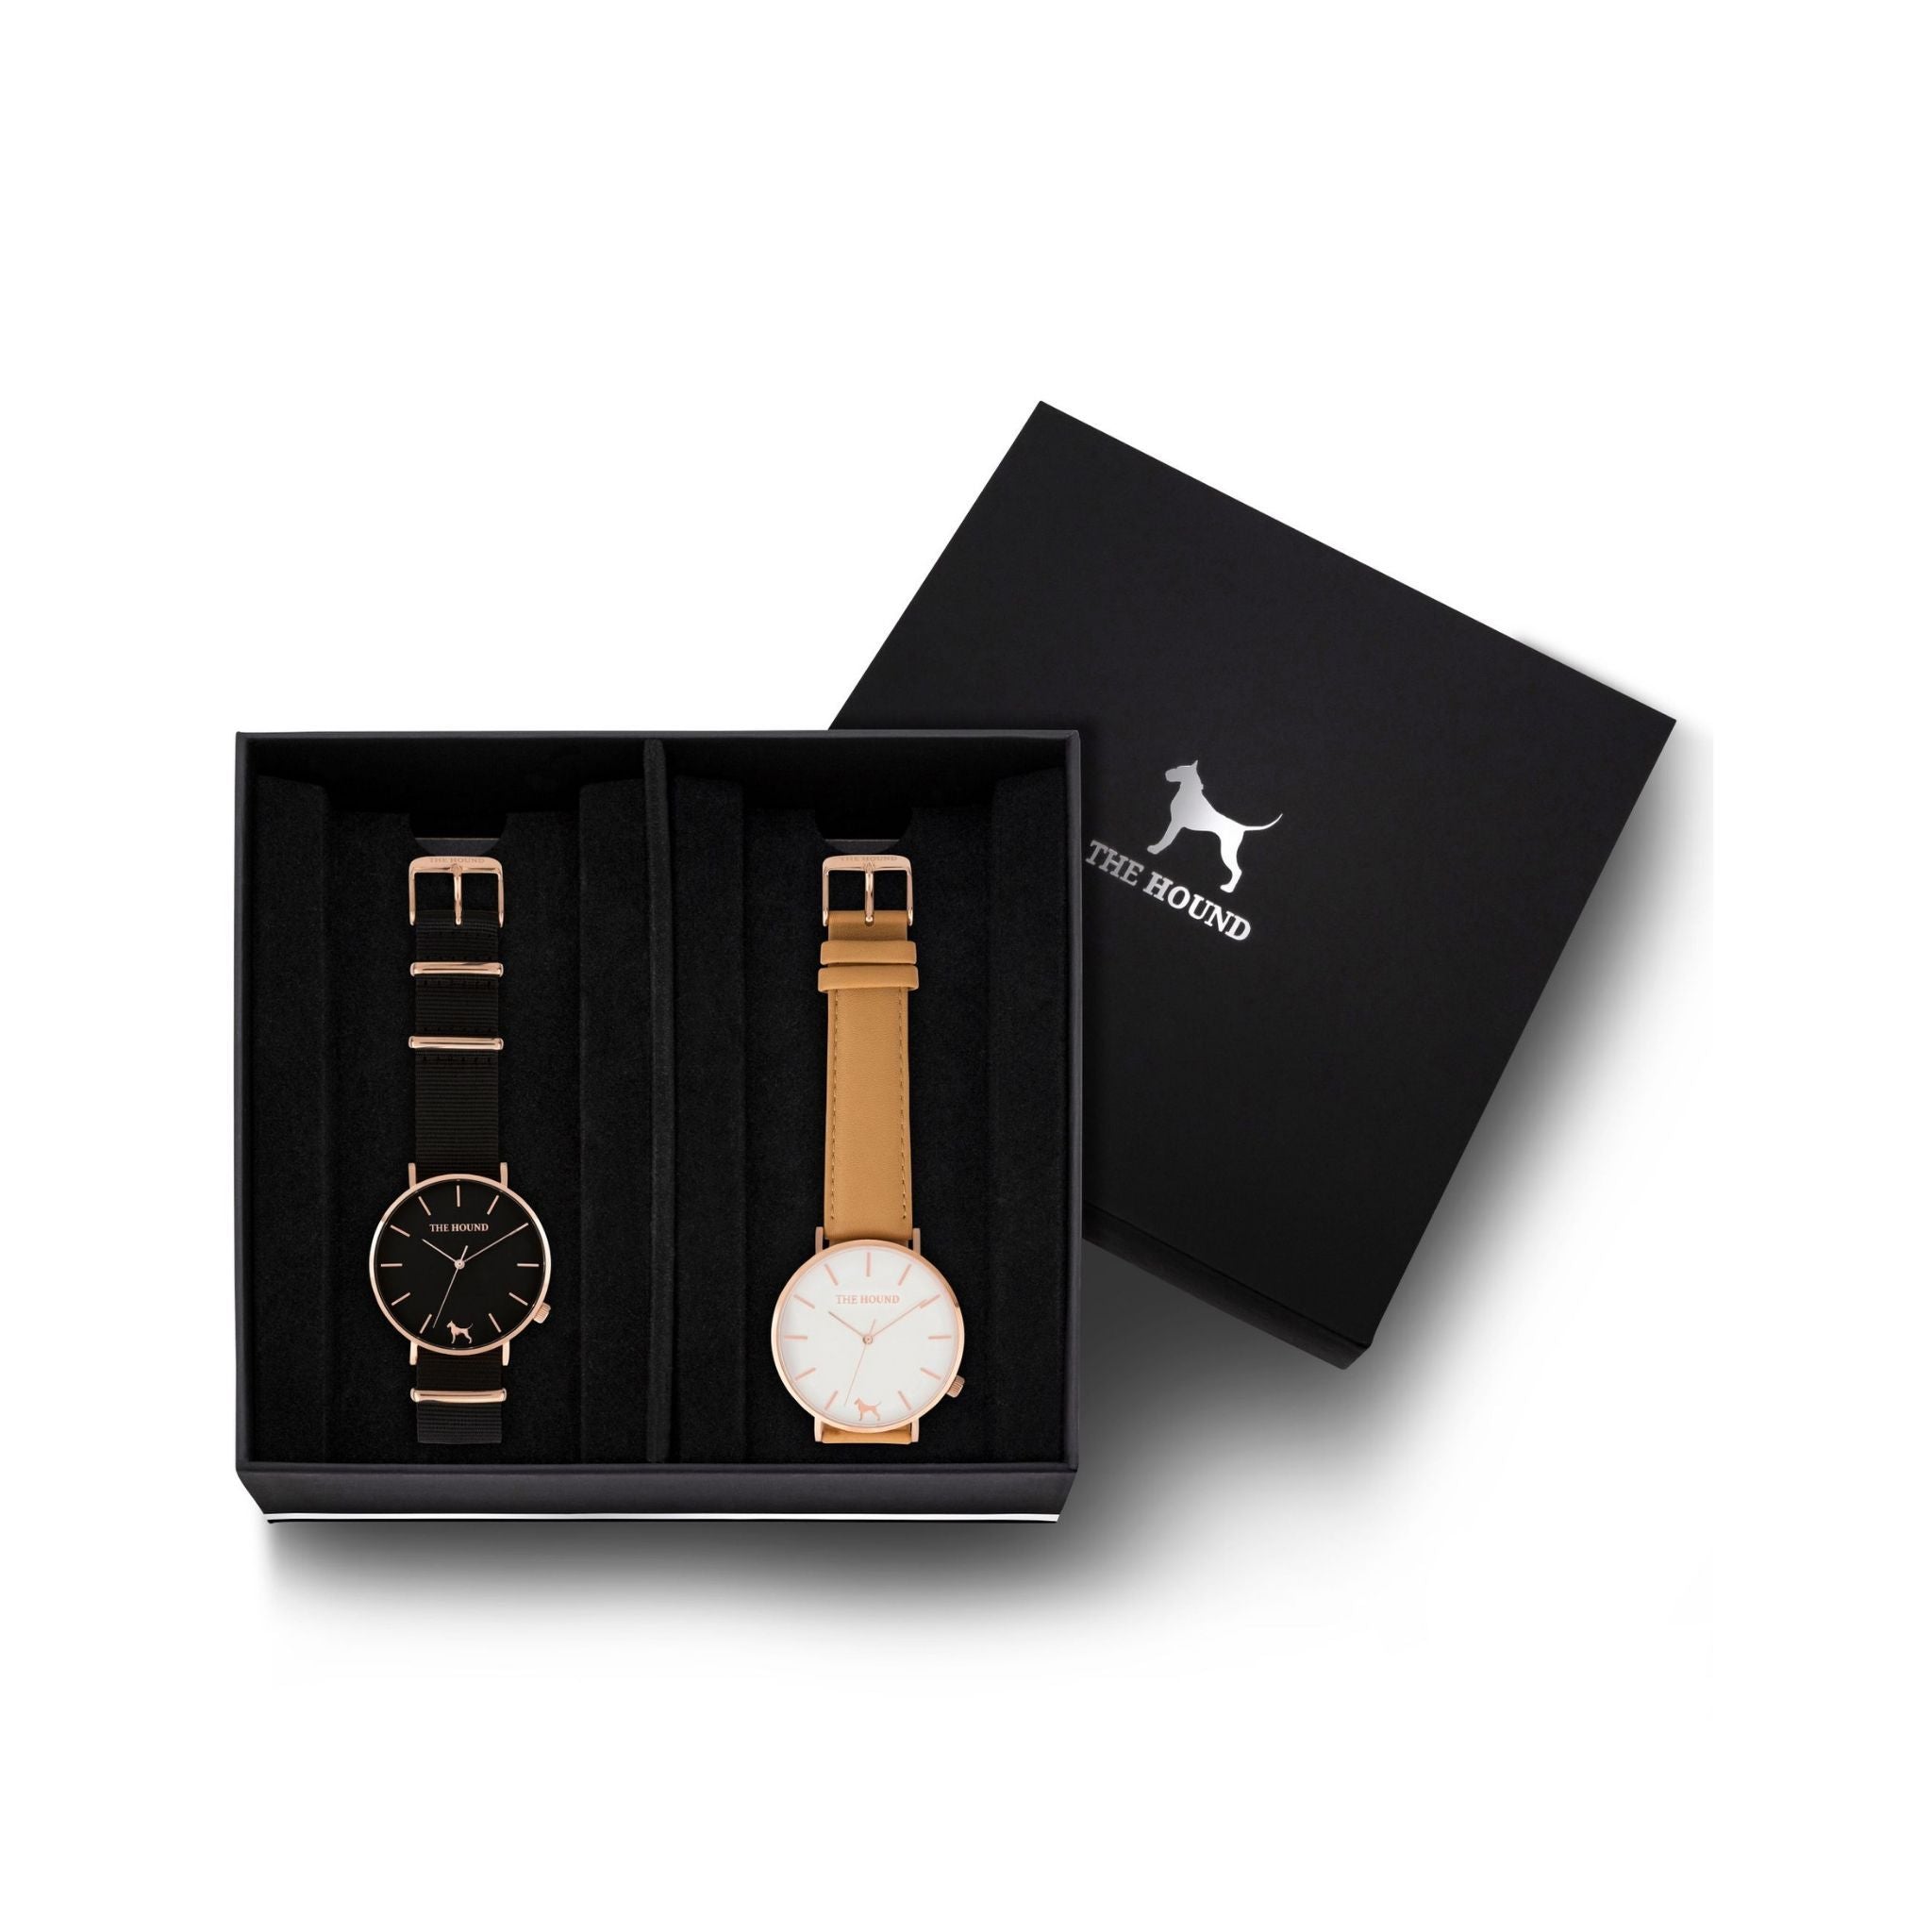 Custom gift set - Rose gold and black watch with black nato band and a rose gold and white watch with stitched camel genuine leather band